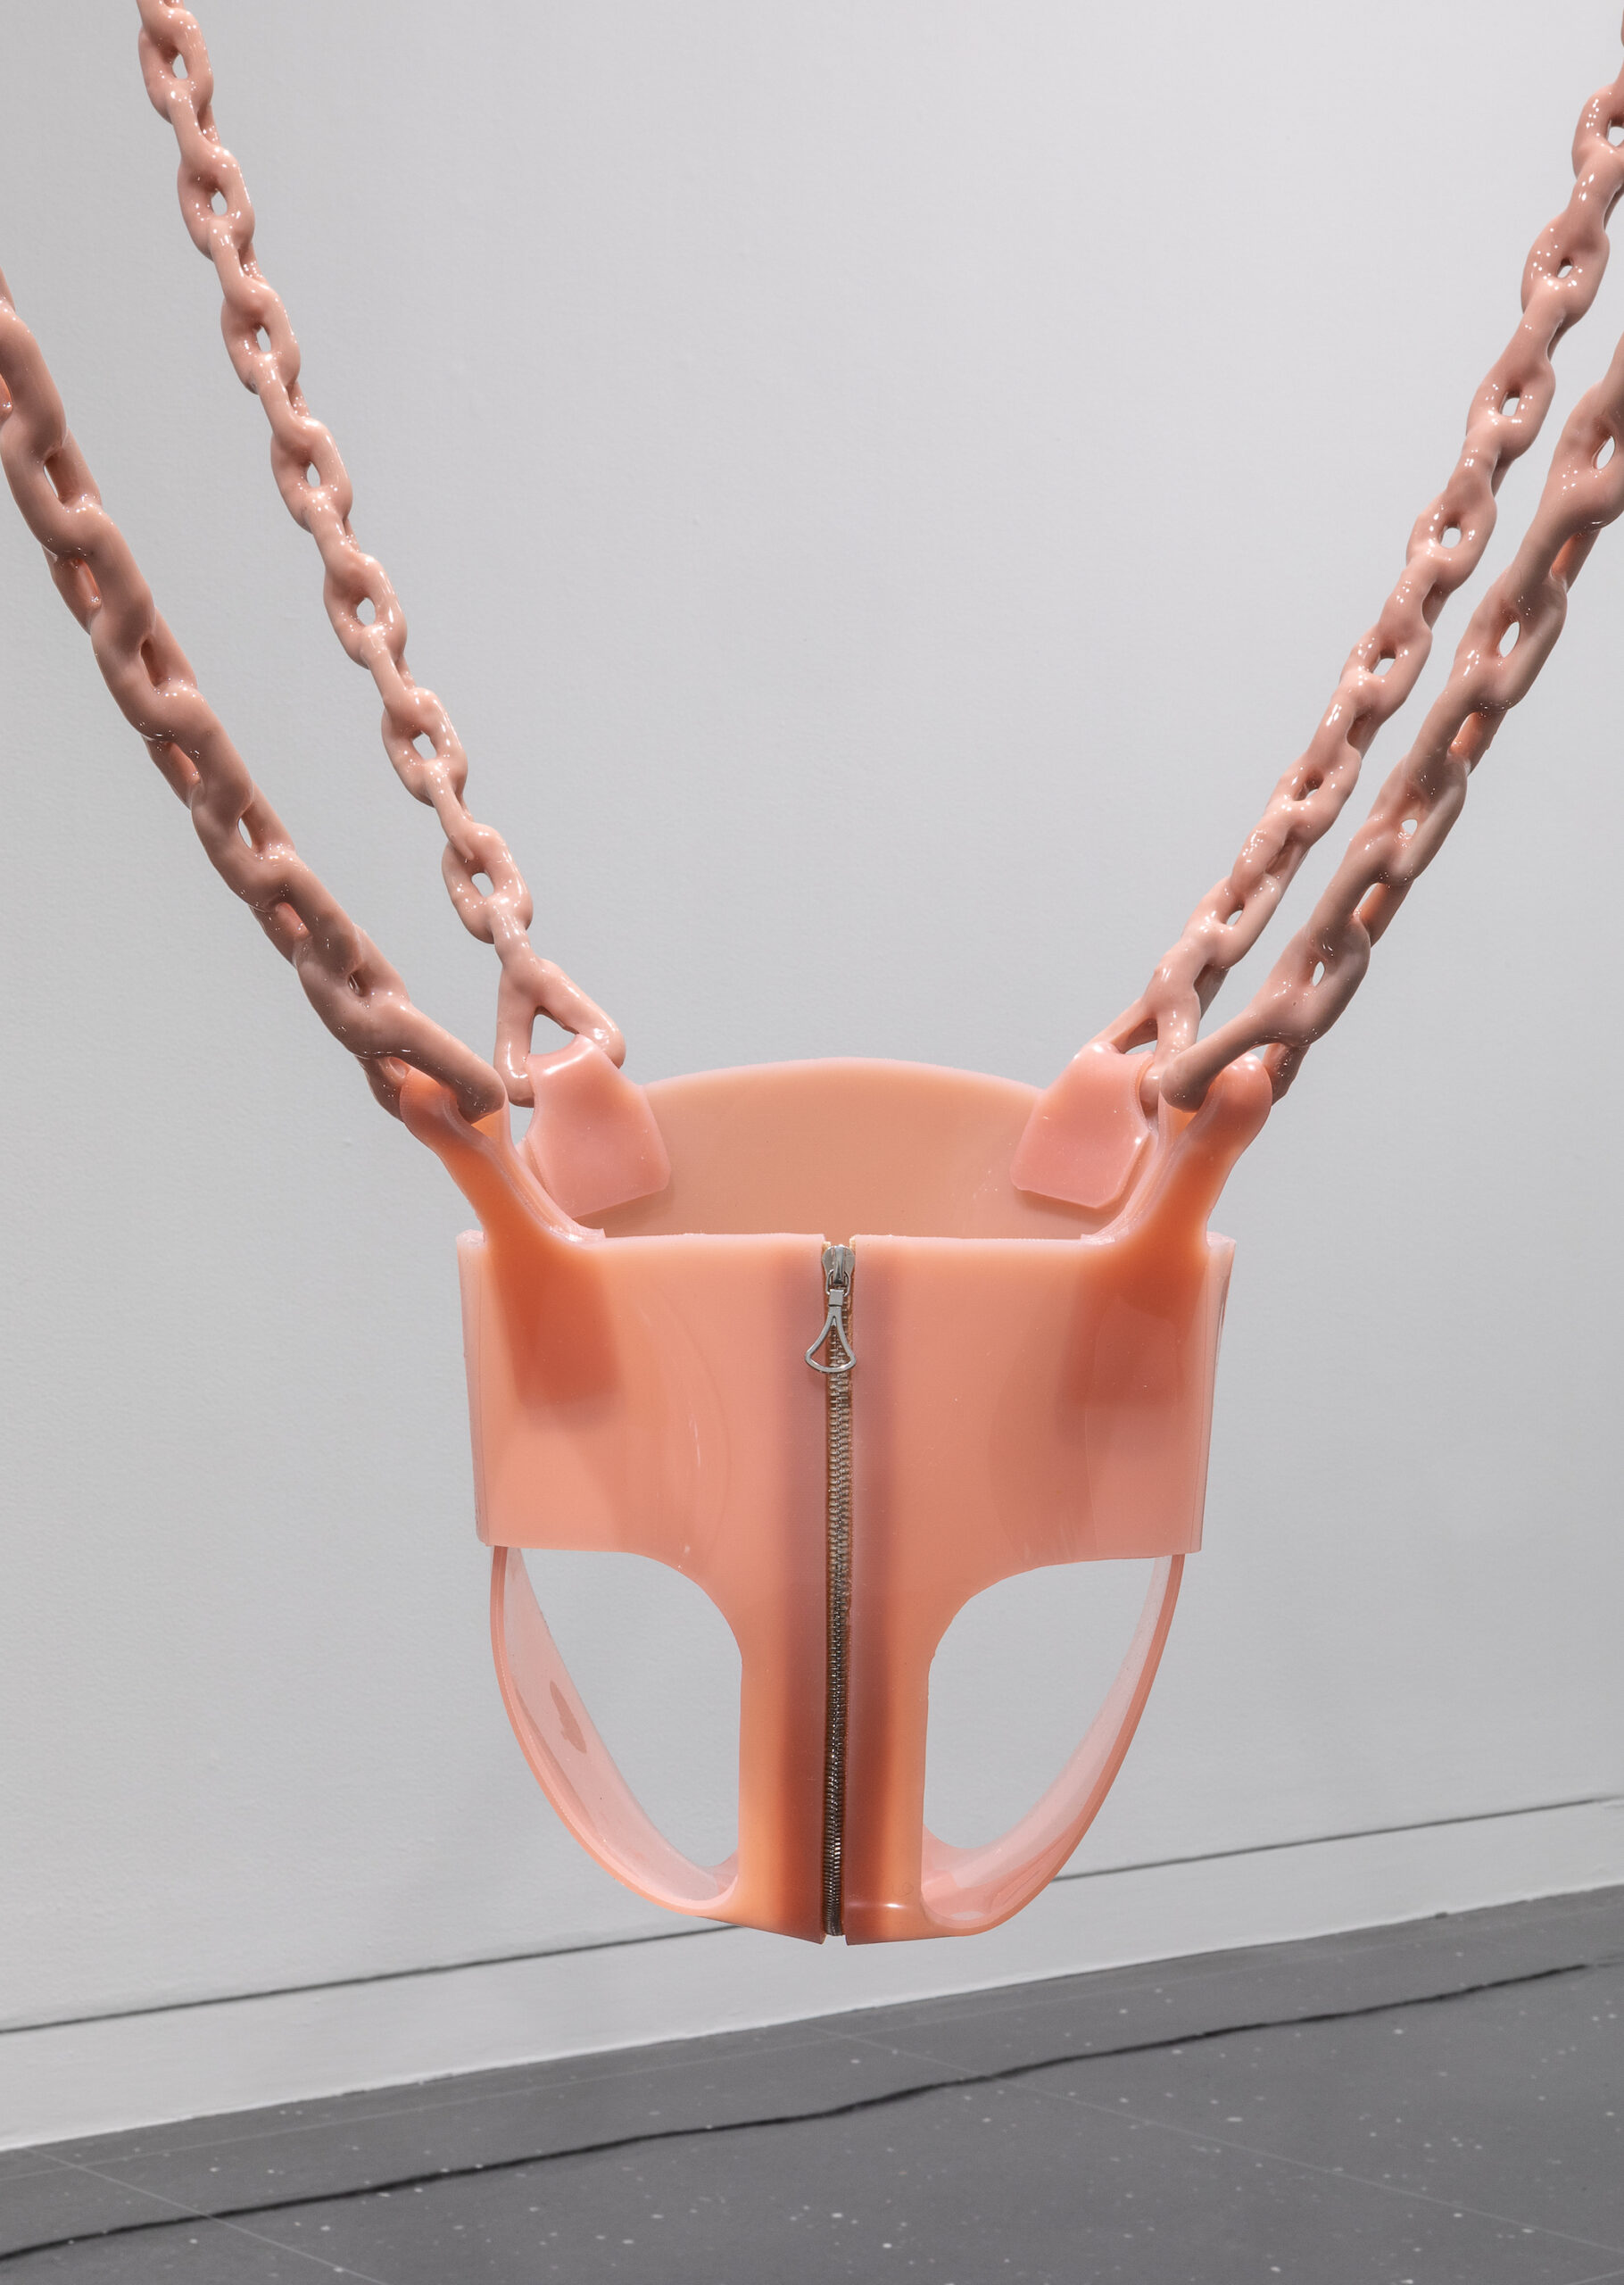 A pale pink toddler's swing made of latex with a large silver zipper up the front.